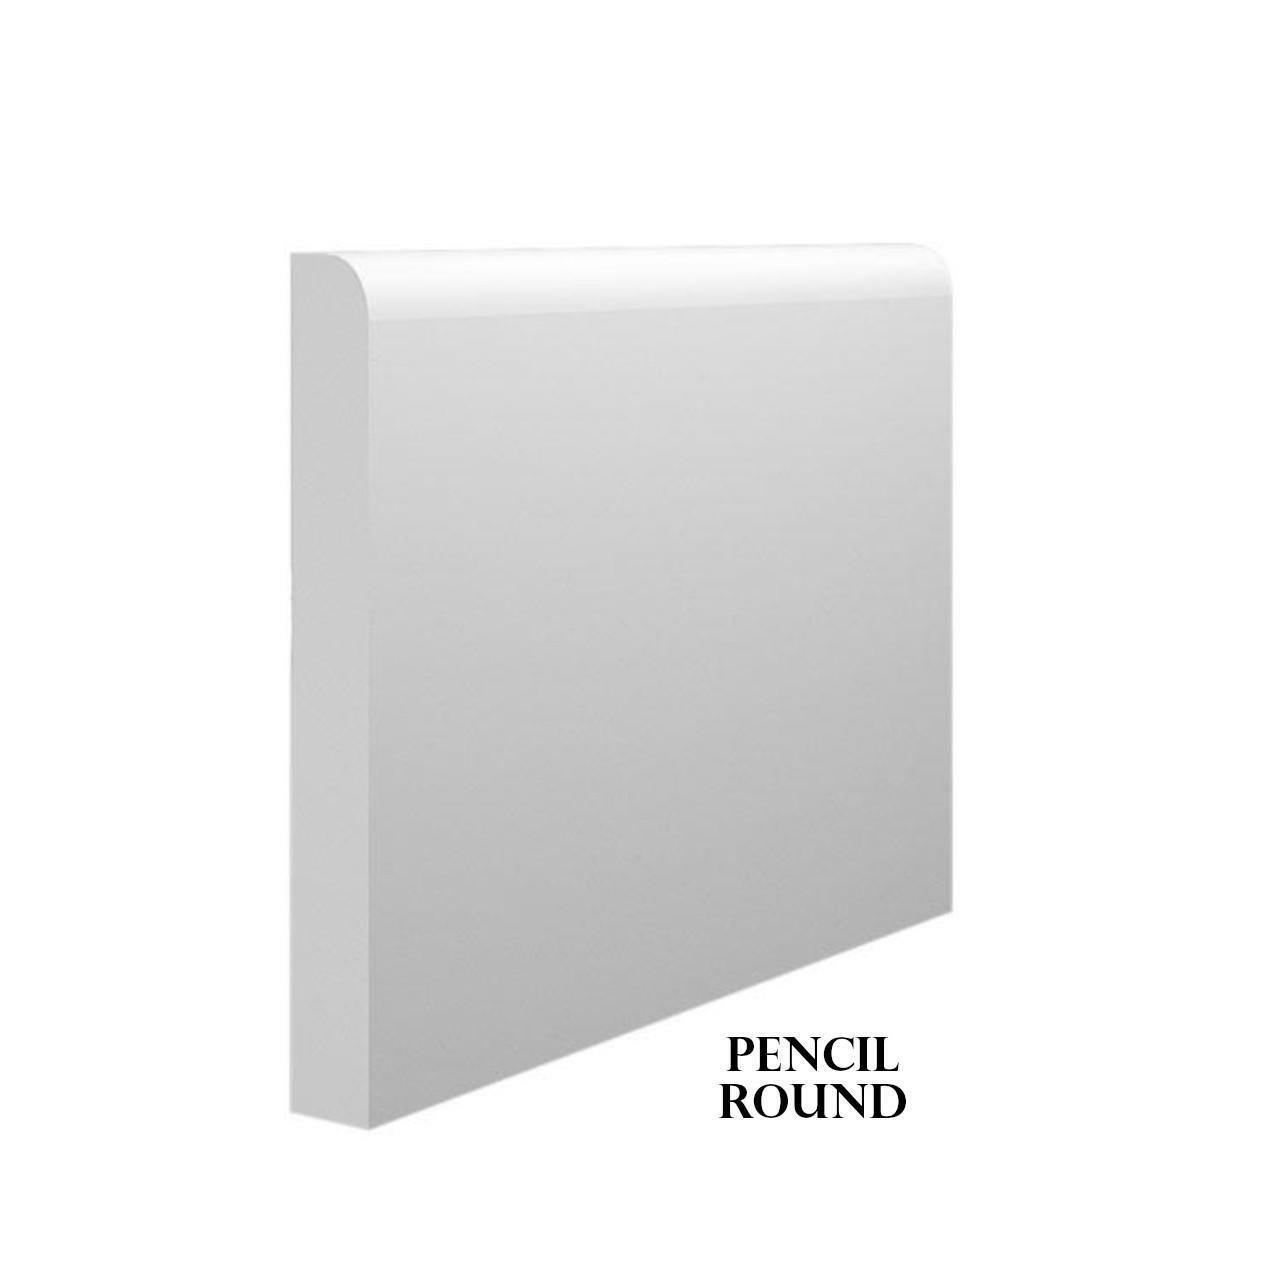 Pencil Round - White Primed MDF Skirting & Architrave